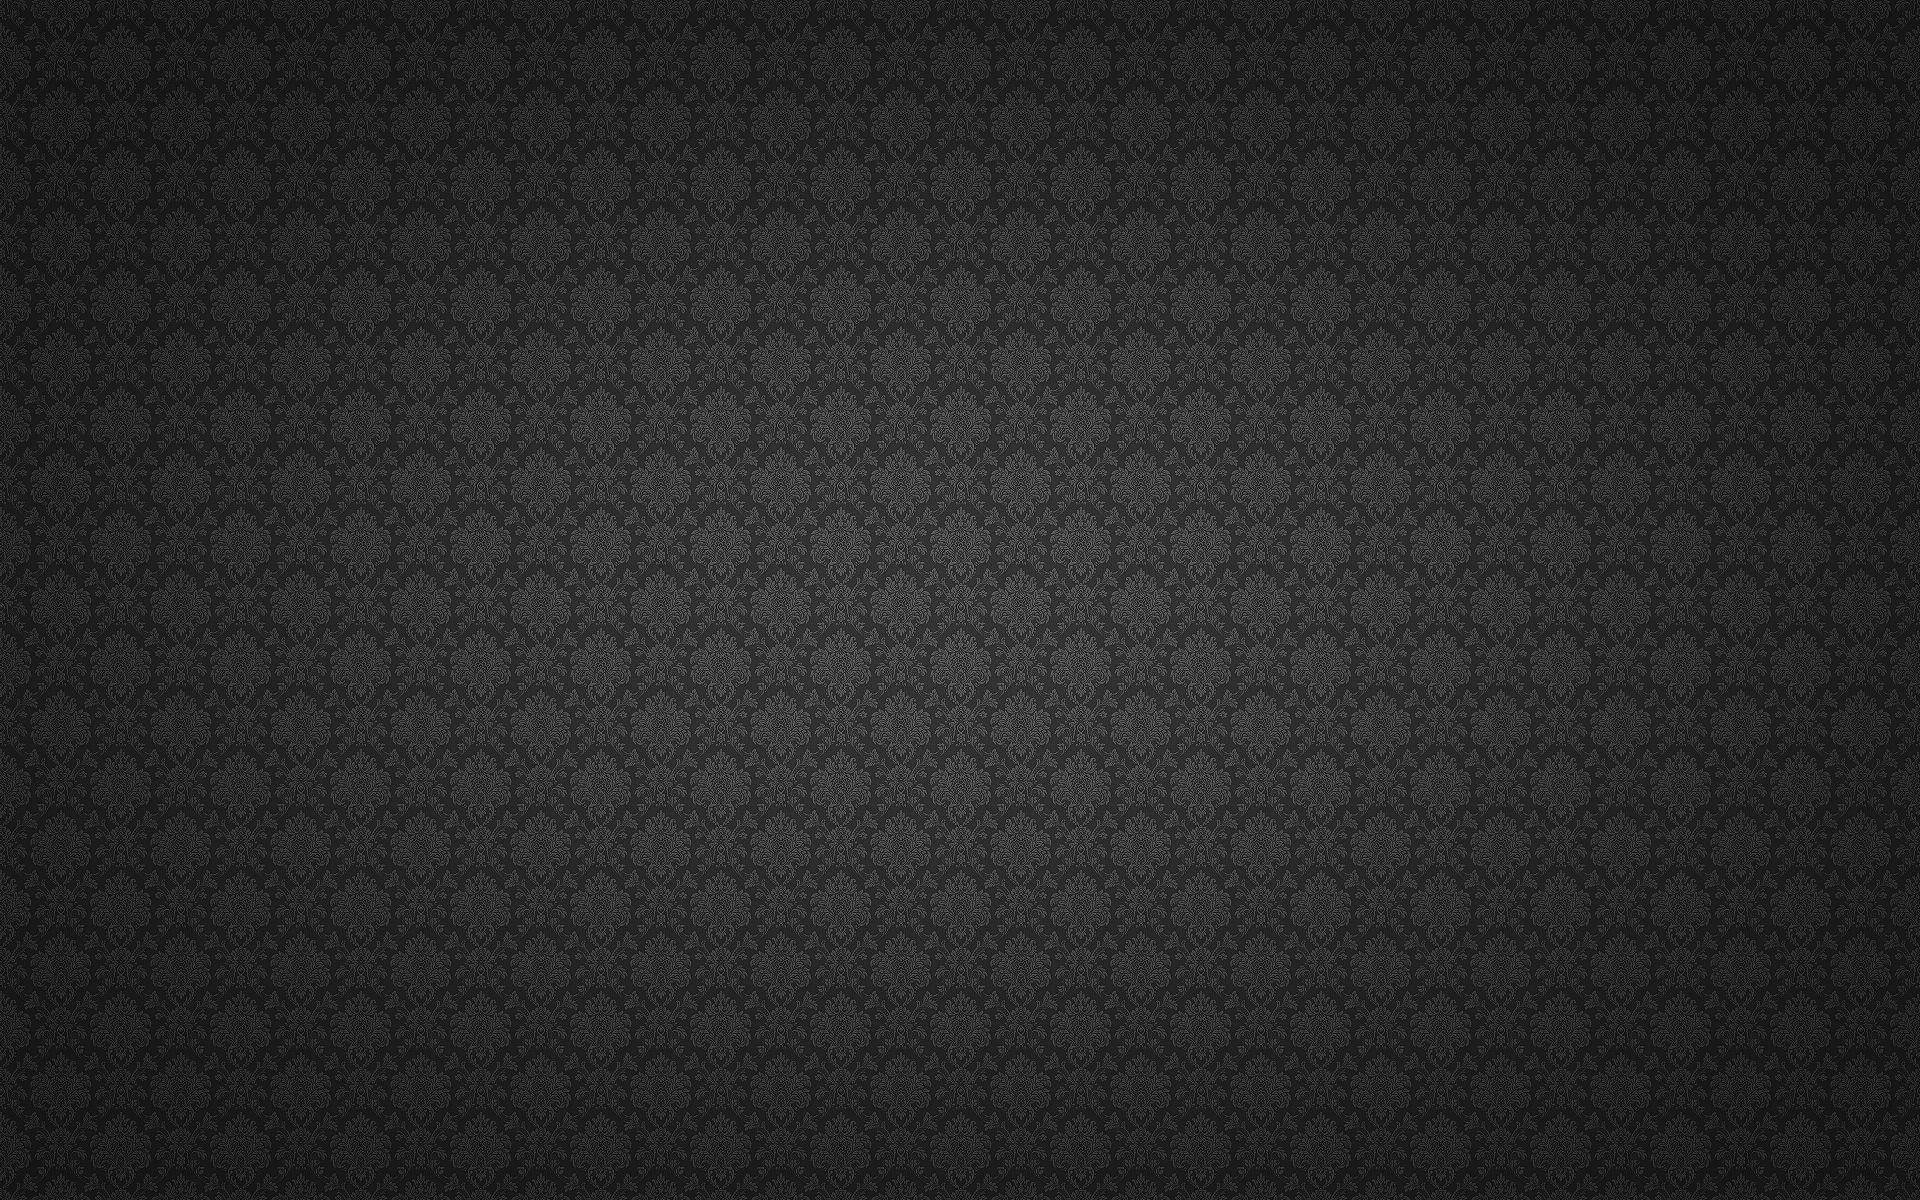 Plain Black With Gothic Pattern Wallpaper